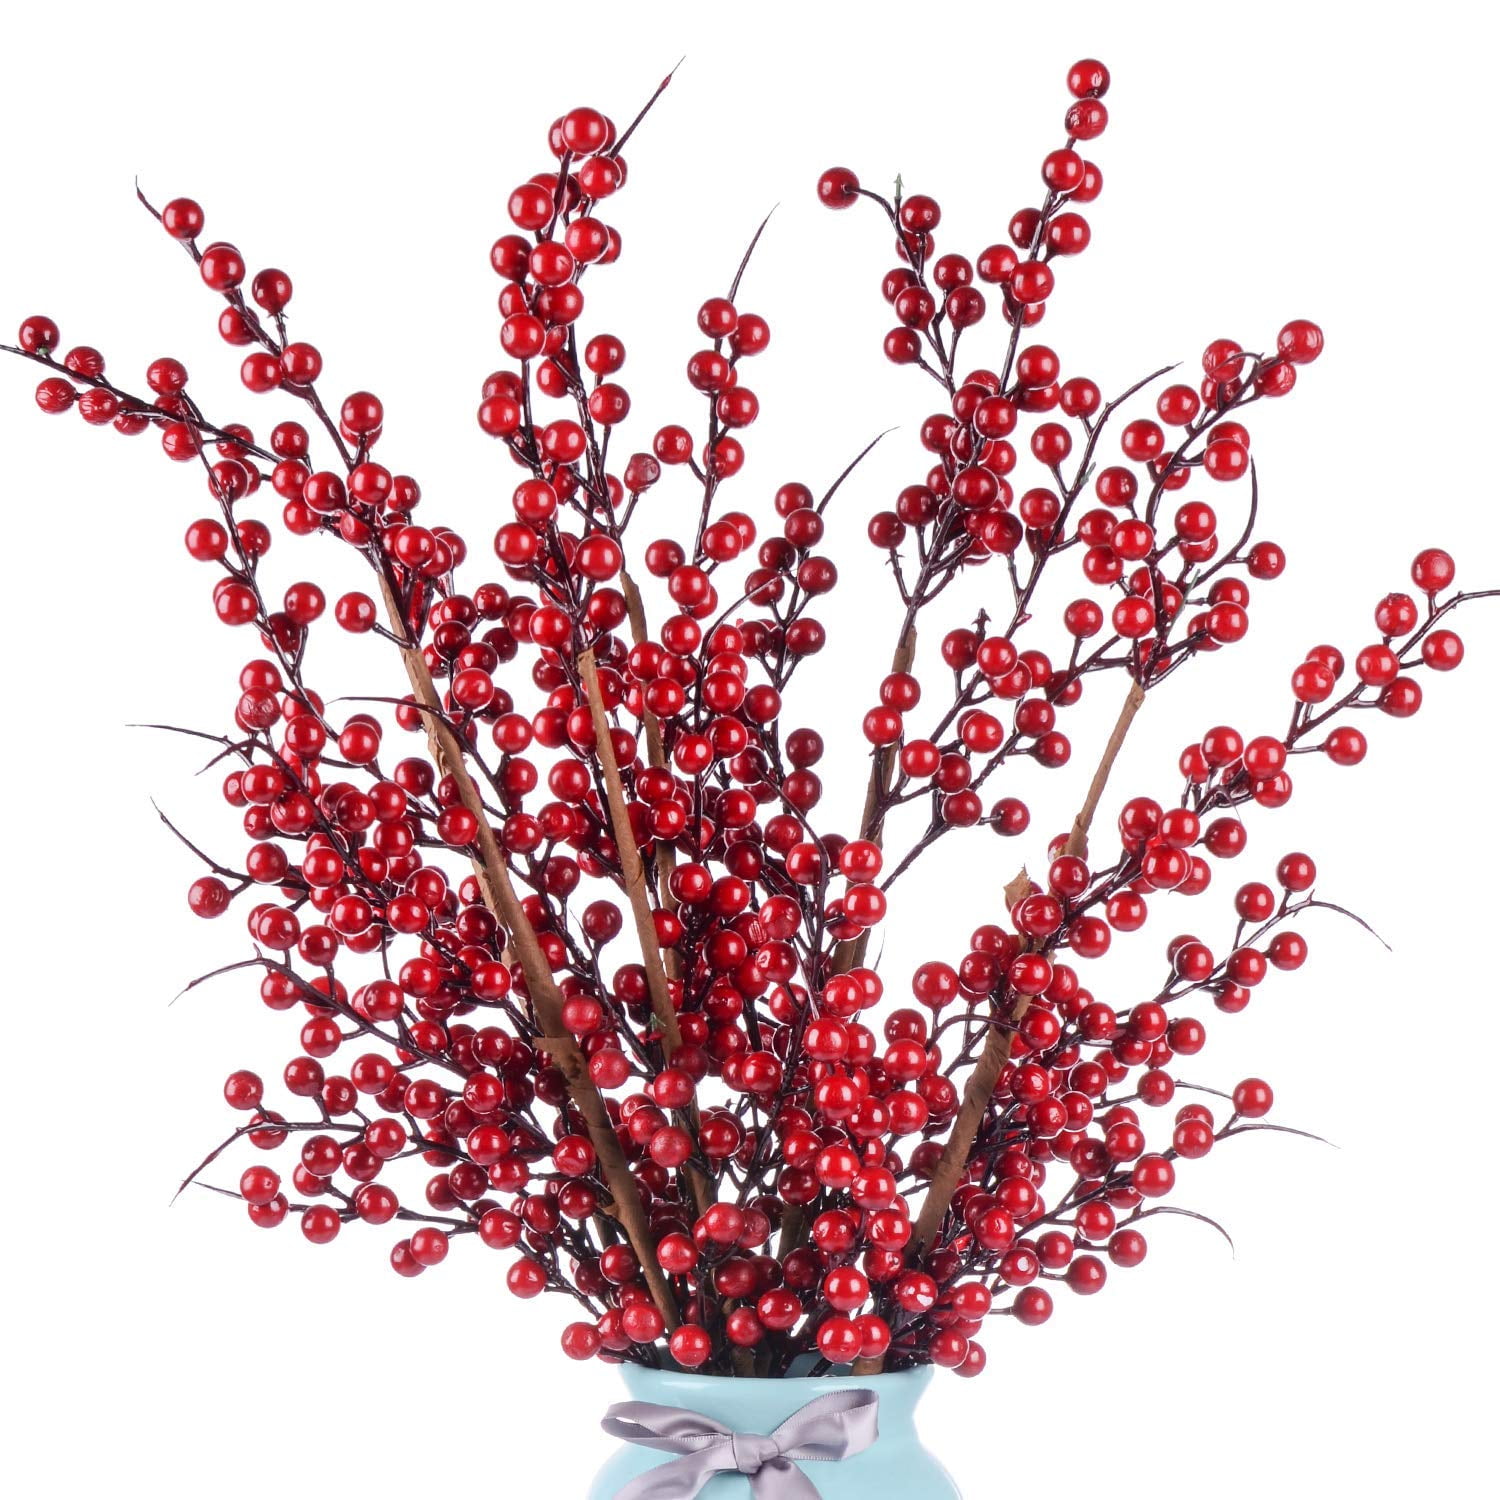 LOKIPA 14 Pack Artificial Red Berry Stems 8 Inch Christmas Red Berry Picks Holly Berries Branches Stem Picks for Christmas Decoration